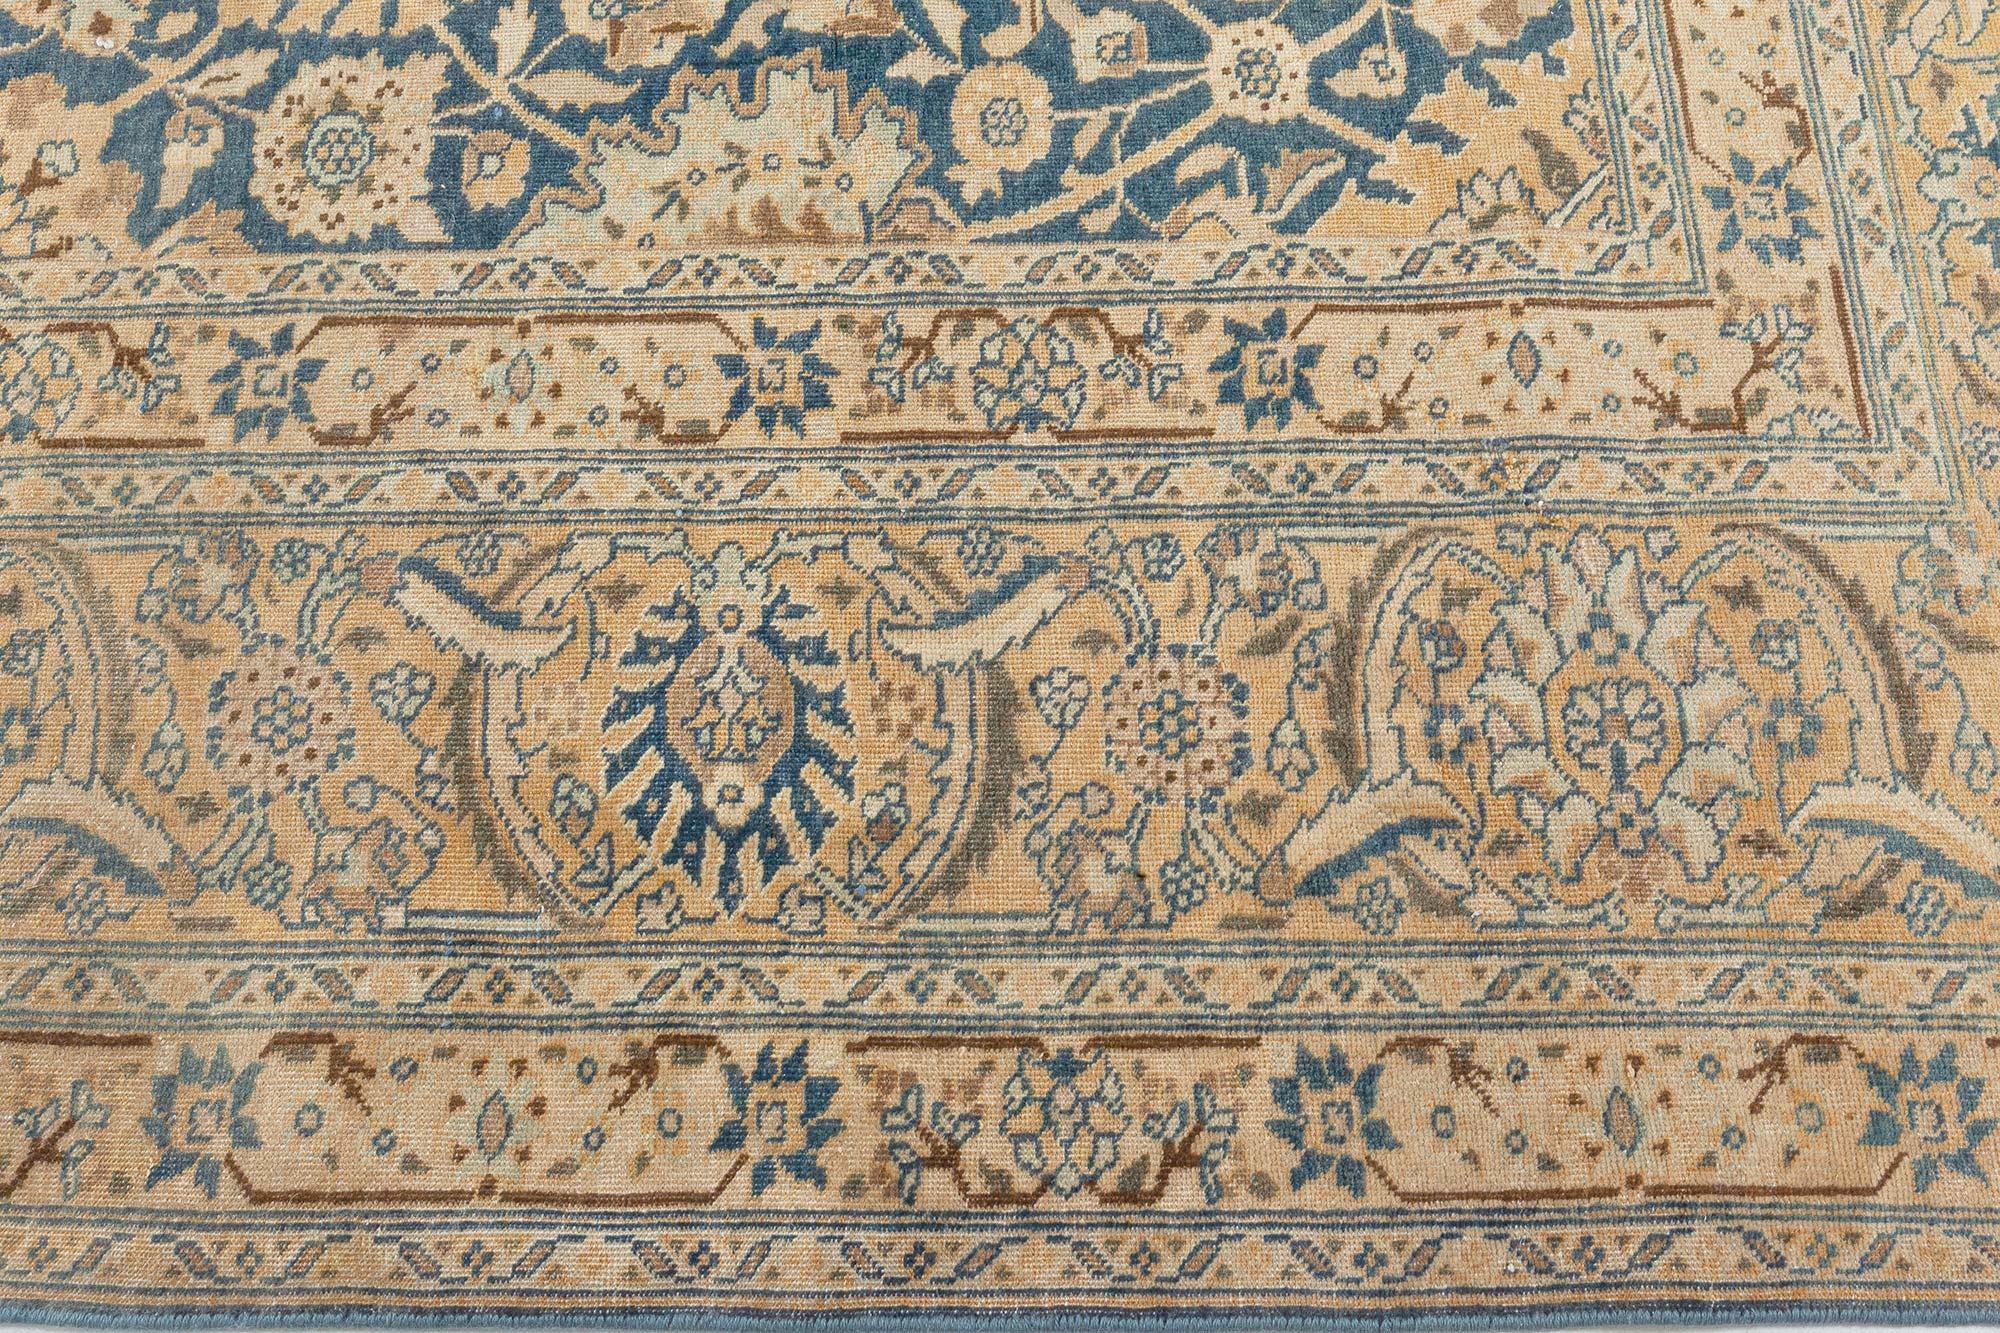 Antique Persian Tabriz Royal blue and caramel wool rug
Size: 9'0